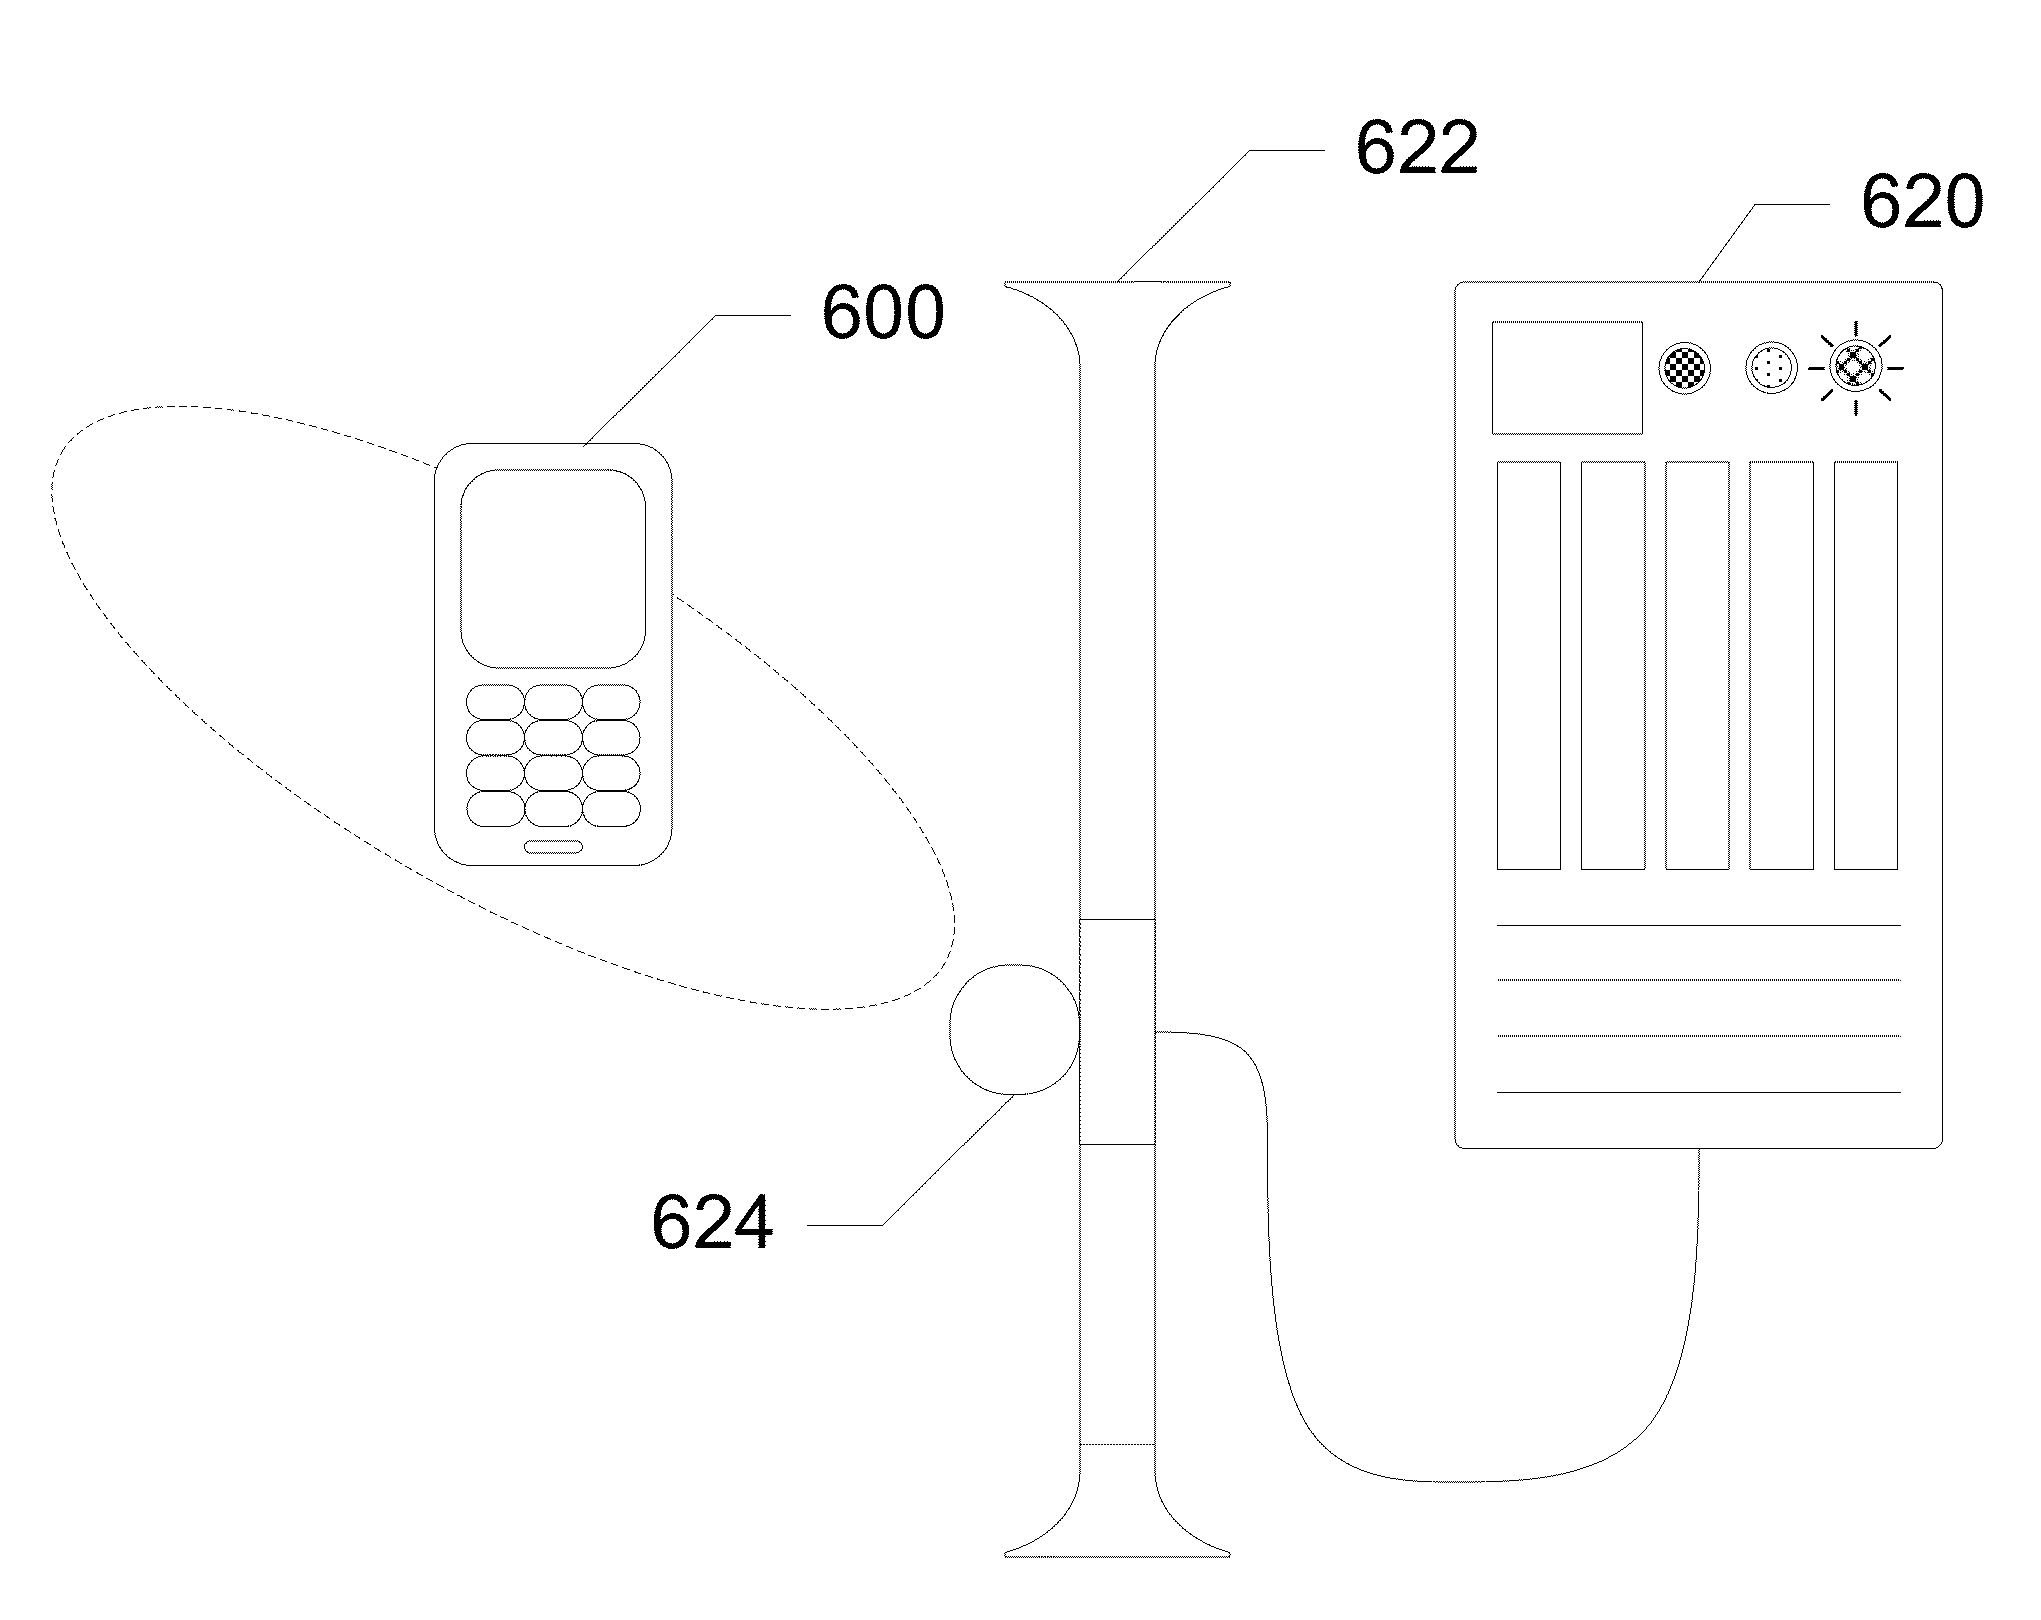 Devices, systems and methods for security using magnetic field based identification